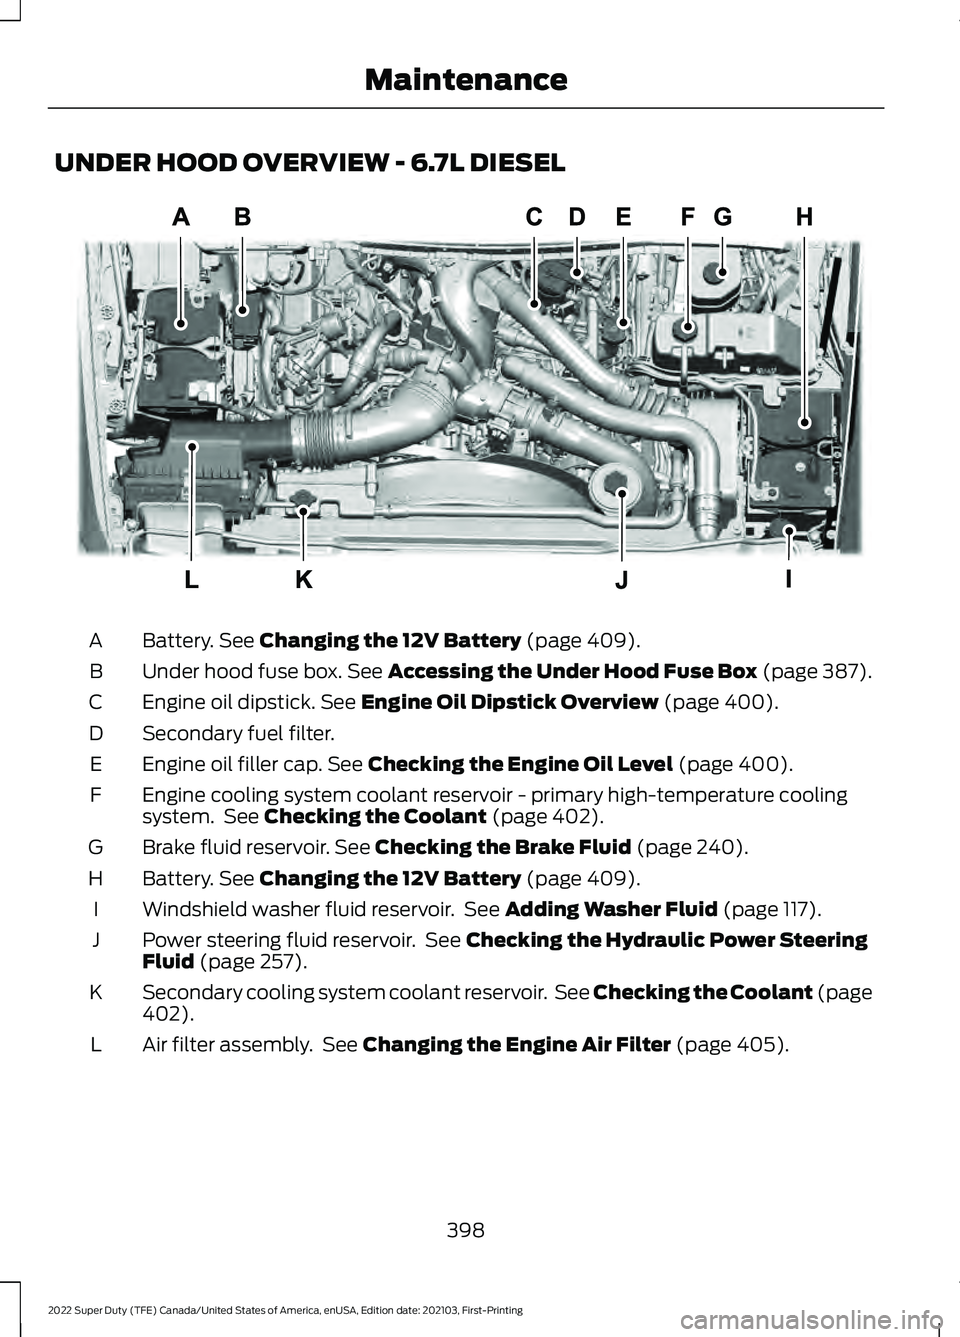 FORD F-450 2022  Owners Manual UNDER HOOD OVERVIEW - 6.7L DIESEL
Battery. See Changing the 12V Battery (page 409).
A
Under hood fuse box.
 See Accessing the Under Hood Fuse Box (page 387).
B
Engine oil dipstick.
 See Engine Oil Dip